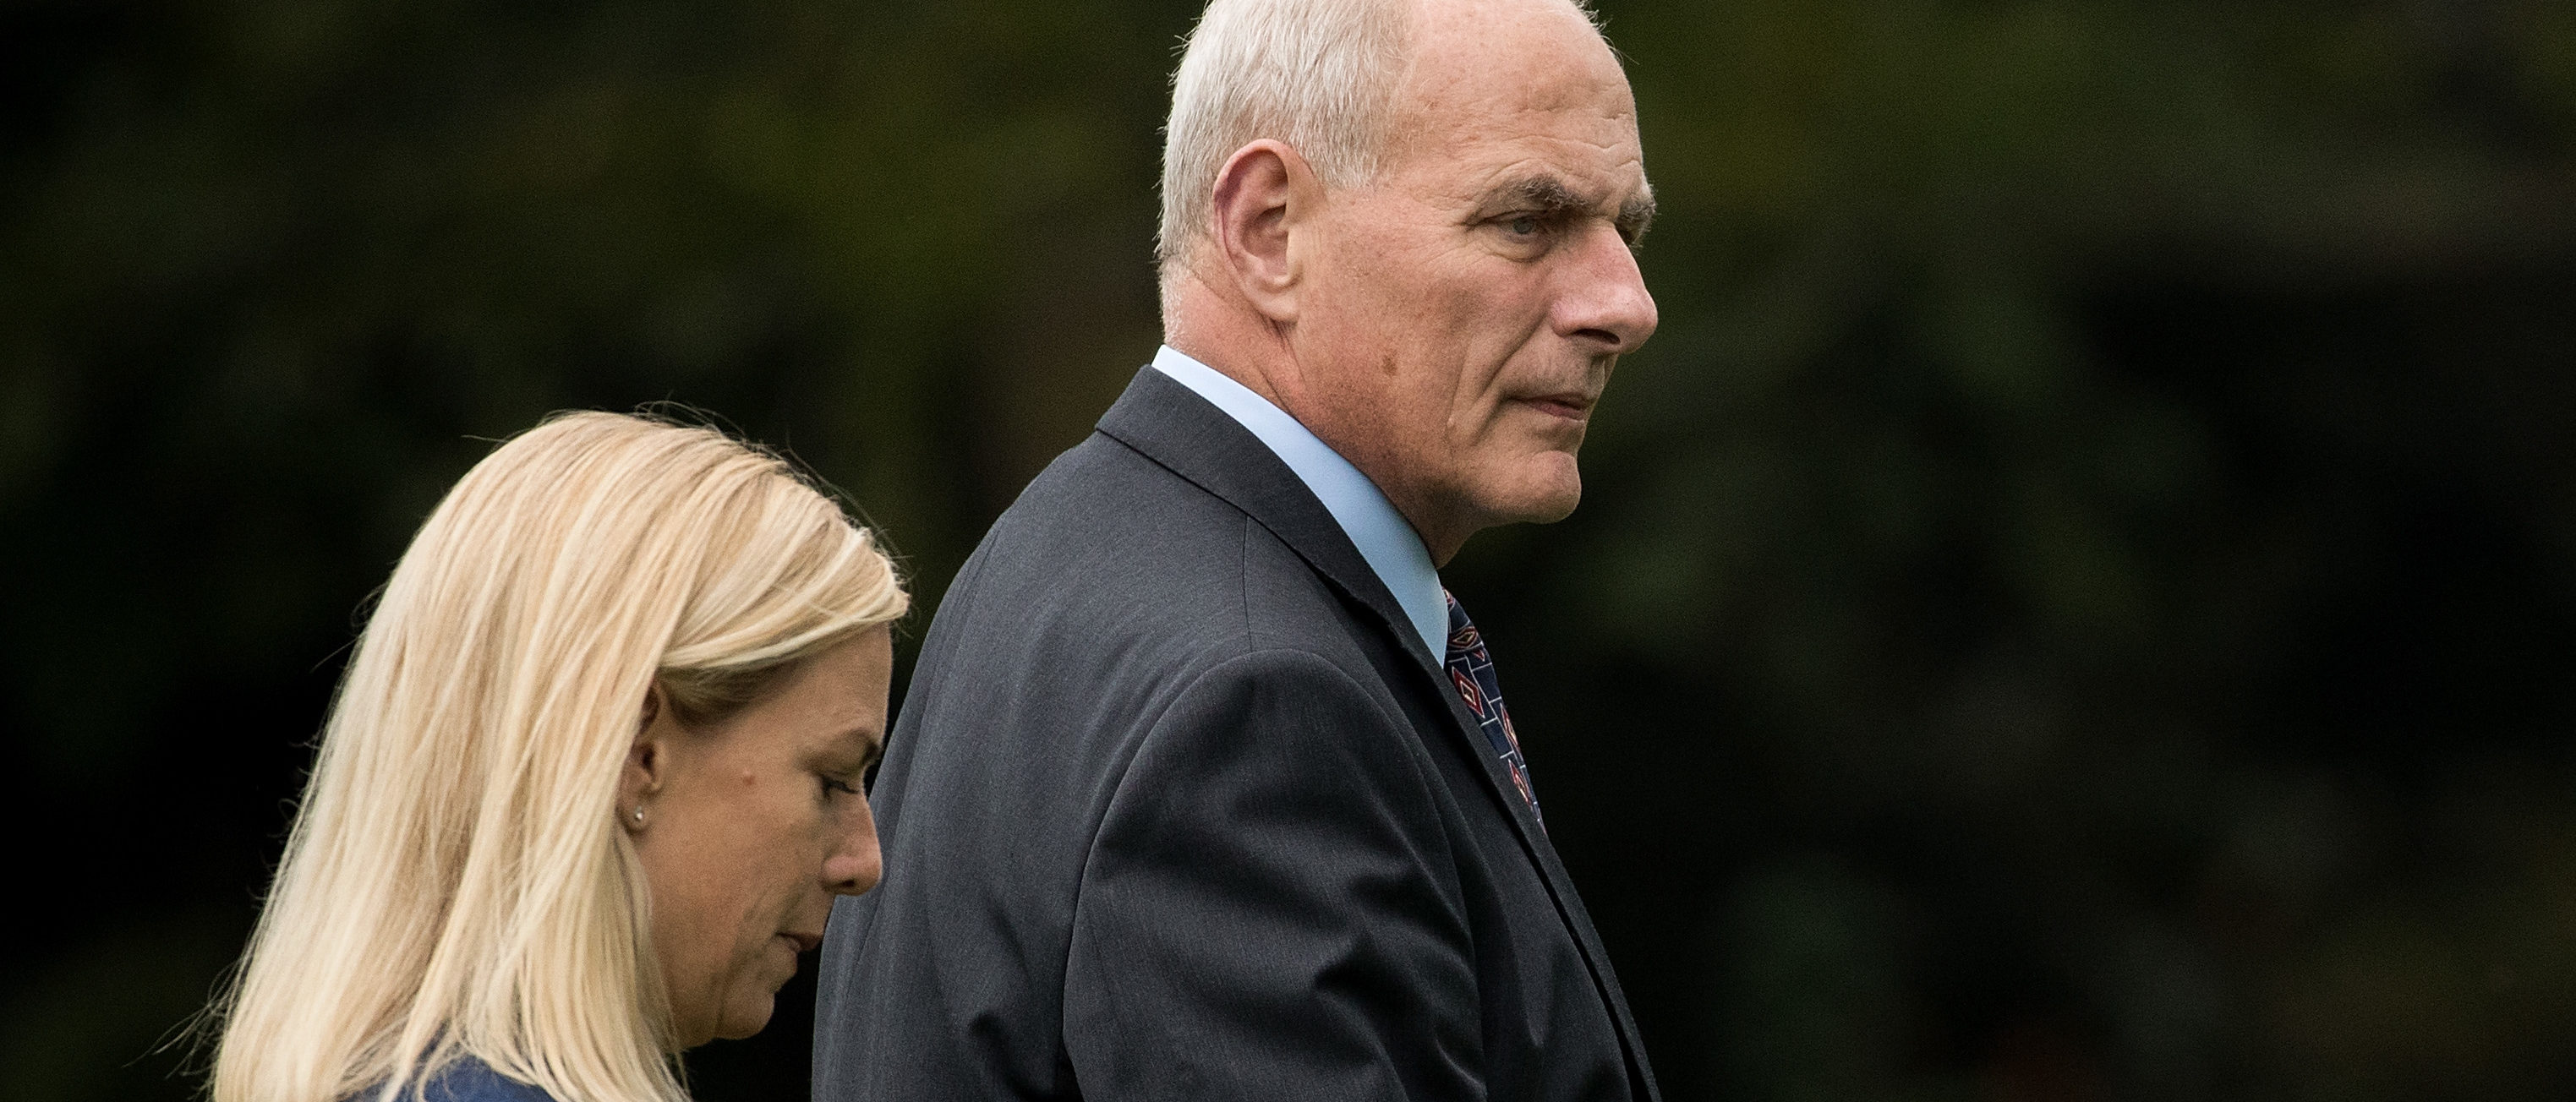 FILE -- Kirstjen Nielsen, President Trump's nominee to be the next Department of Homeland Security secretary, walks with White House Chief of Staff John Kelly as they exit Marine One on the South Lawn of the White House, October 13, 2017 in Washington, D.C. (Photo by Drew Angerer/Getty Images)